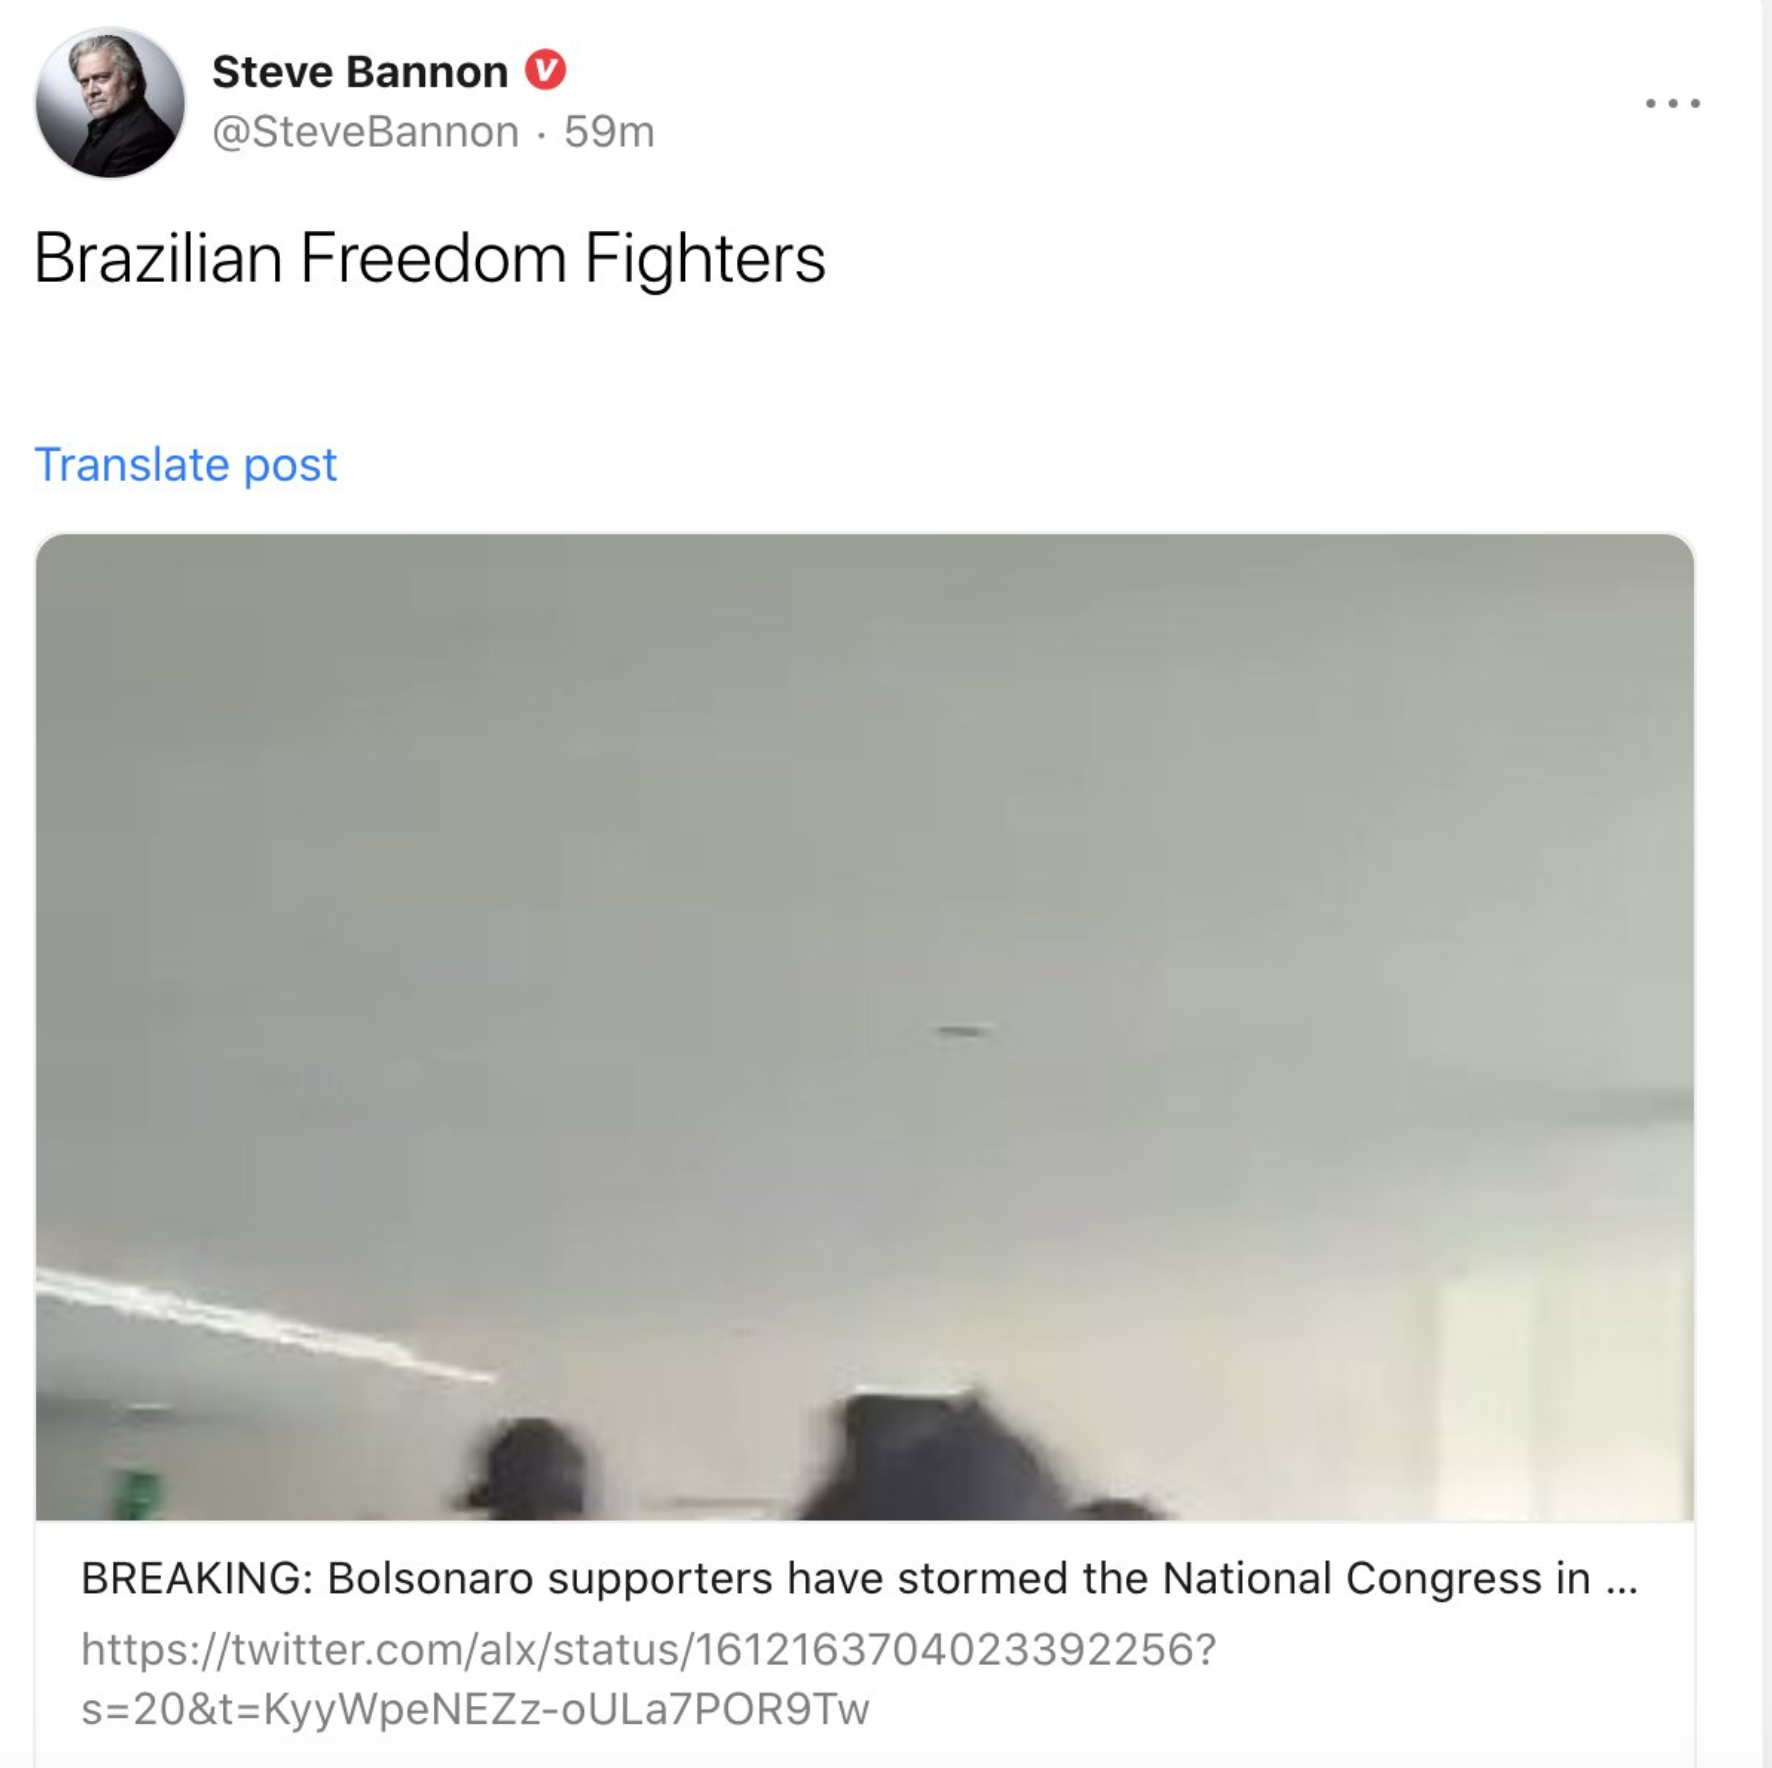 Amid Brazil Riot, Bannon Cheers 'Freedom Fighters